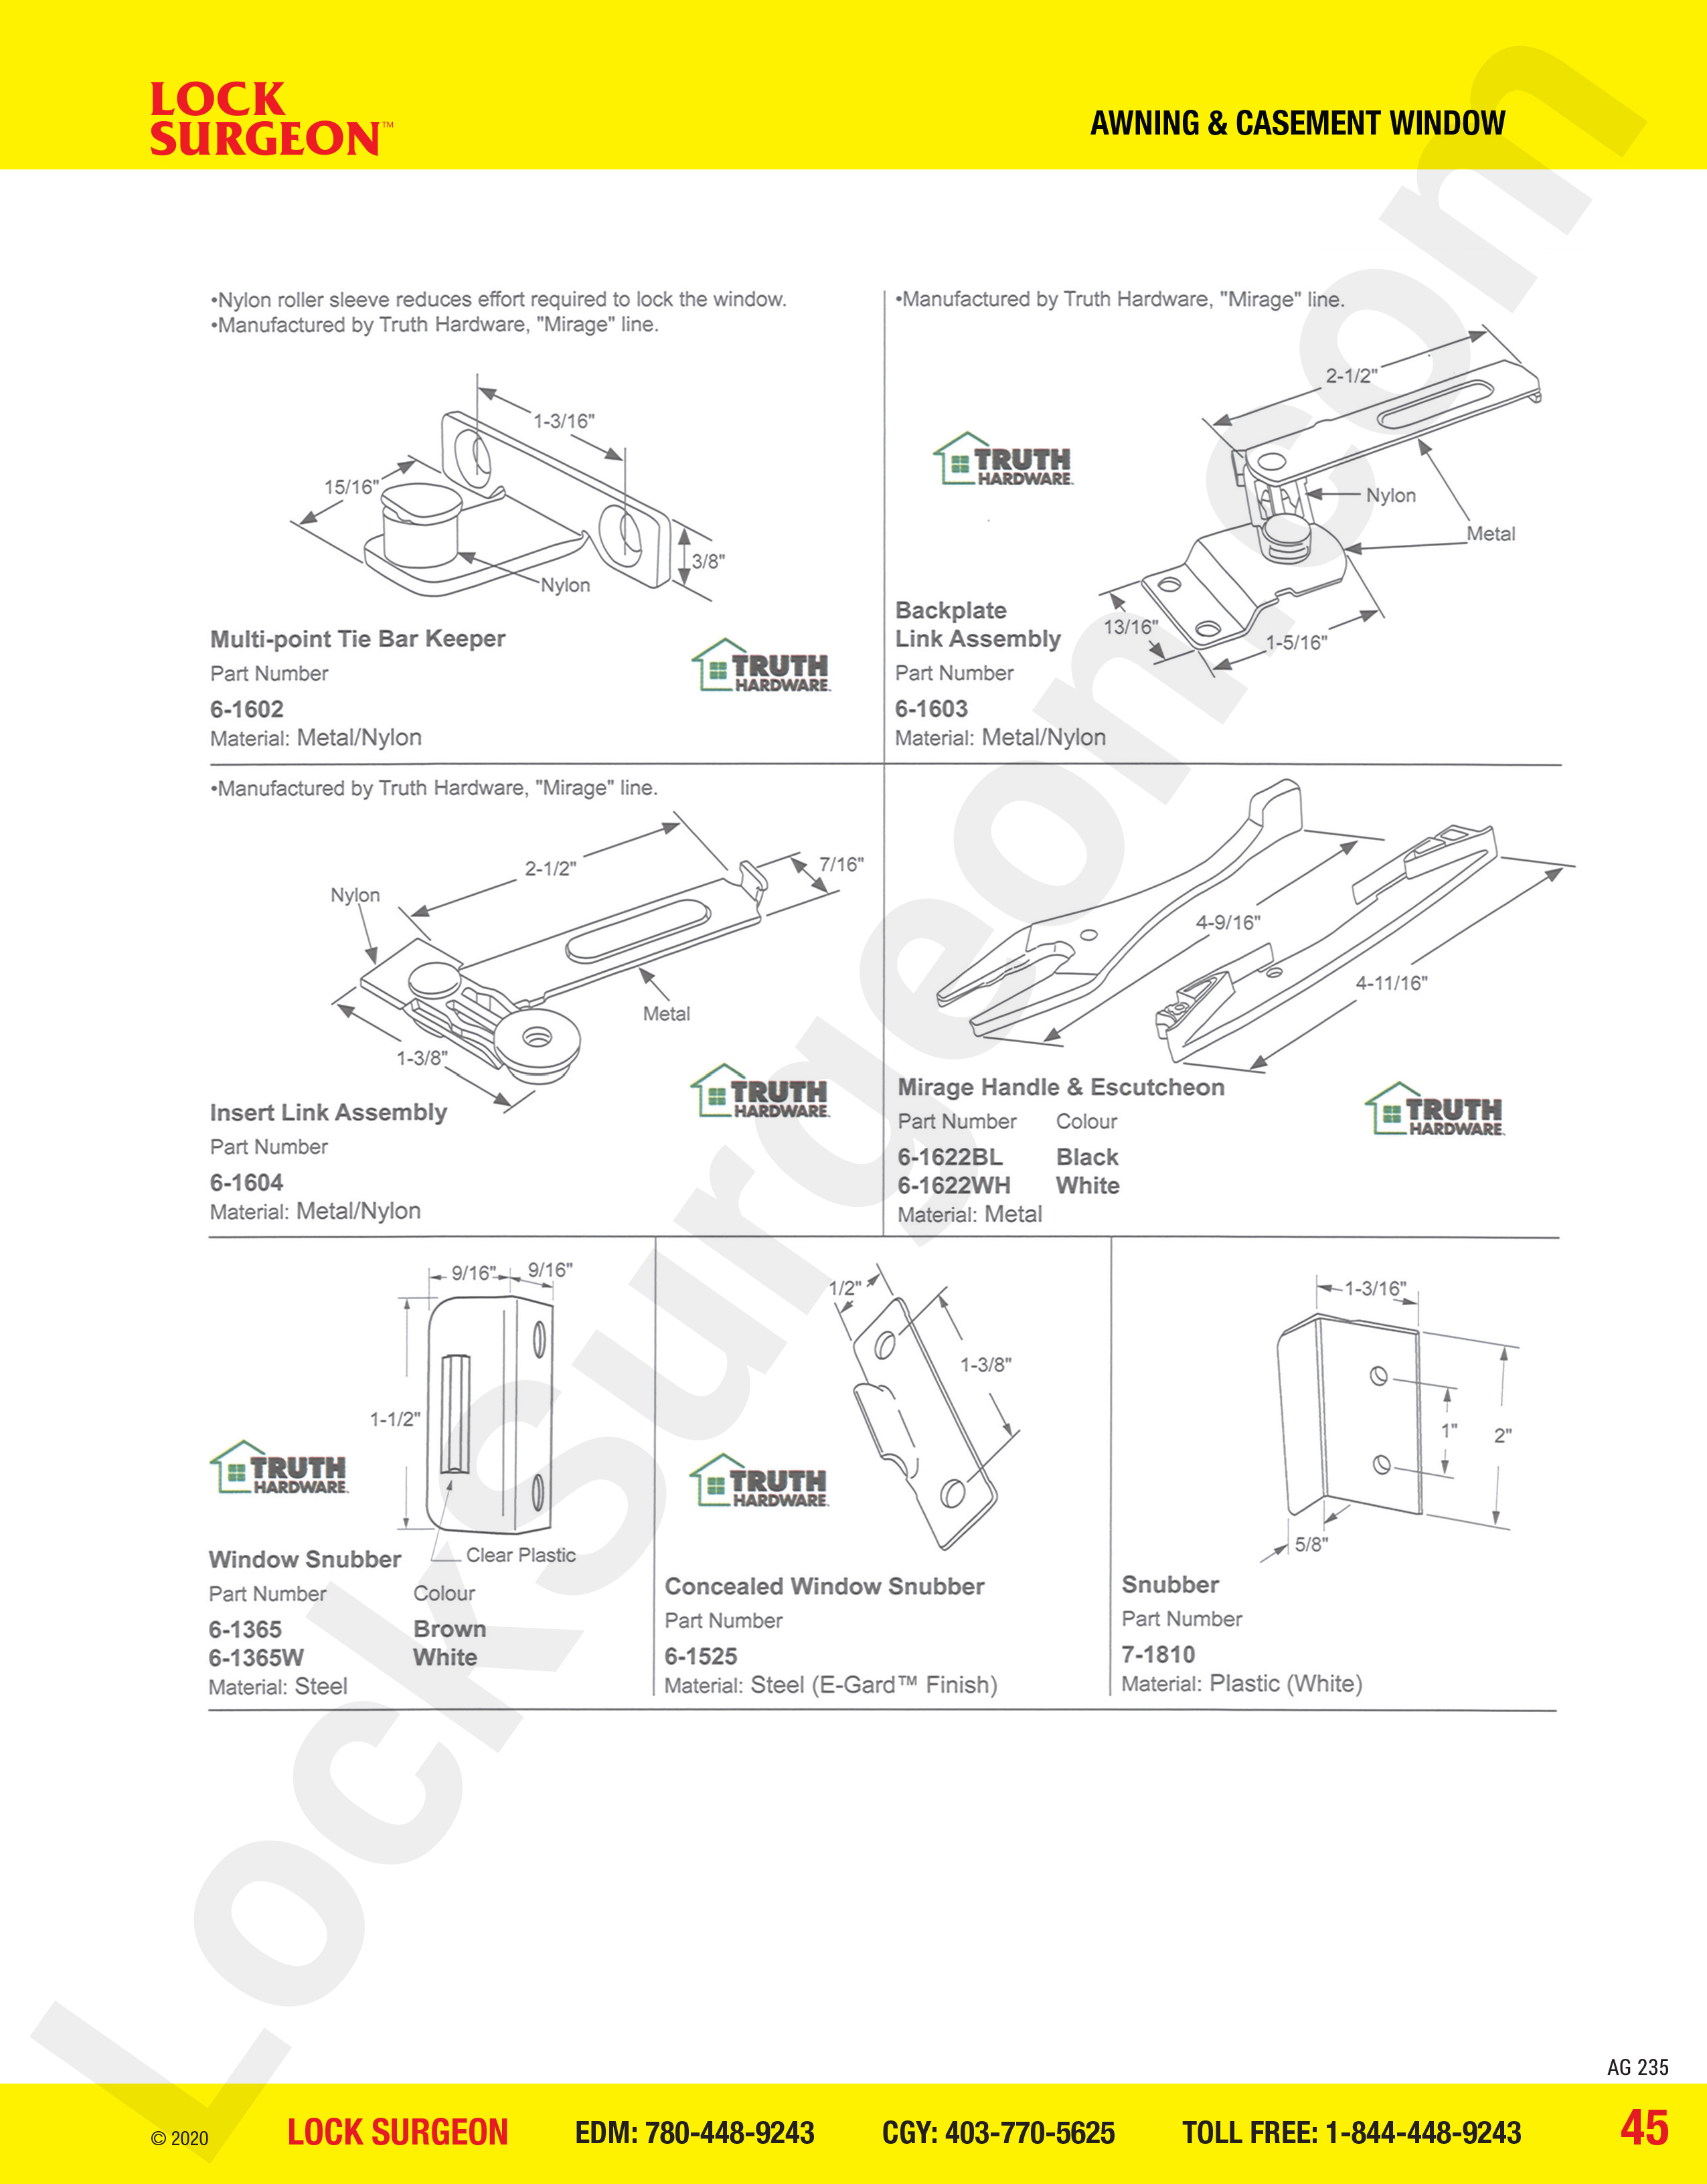 awning and casement window parts for snubbers